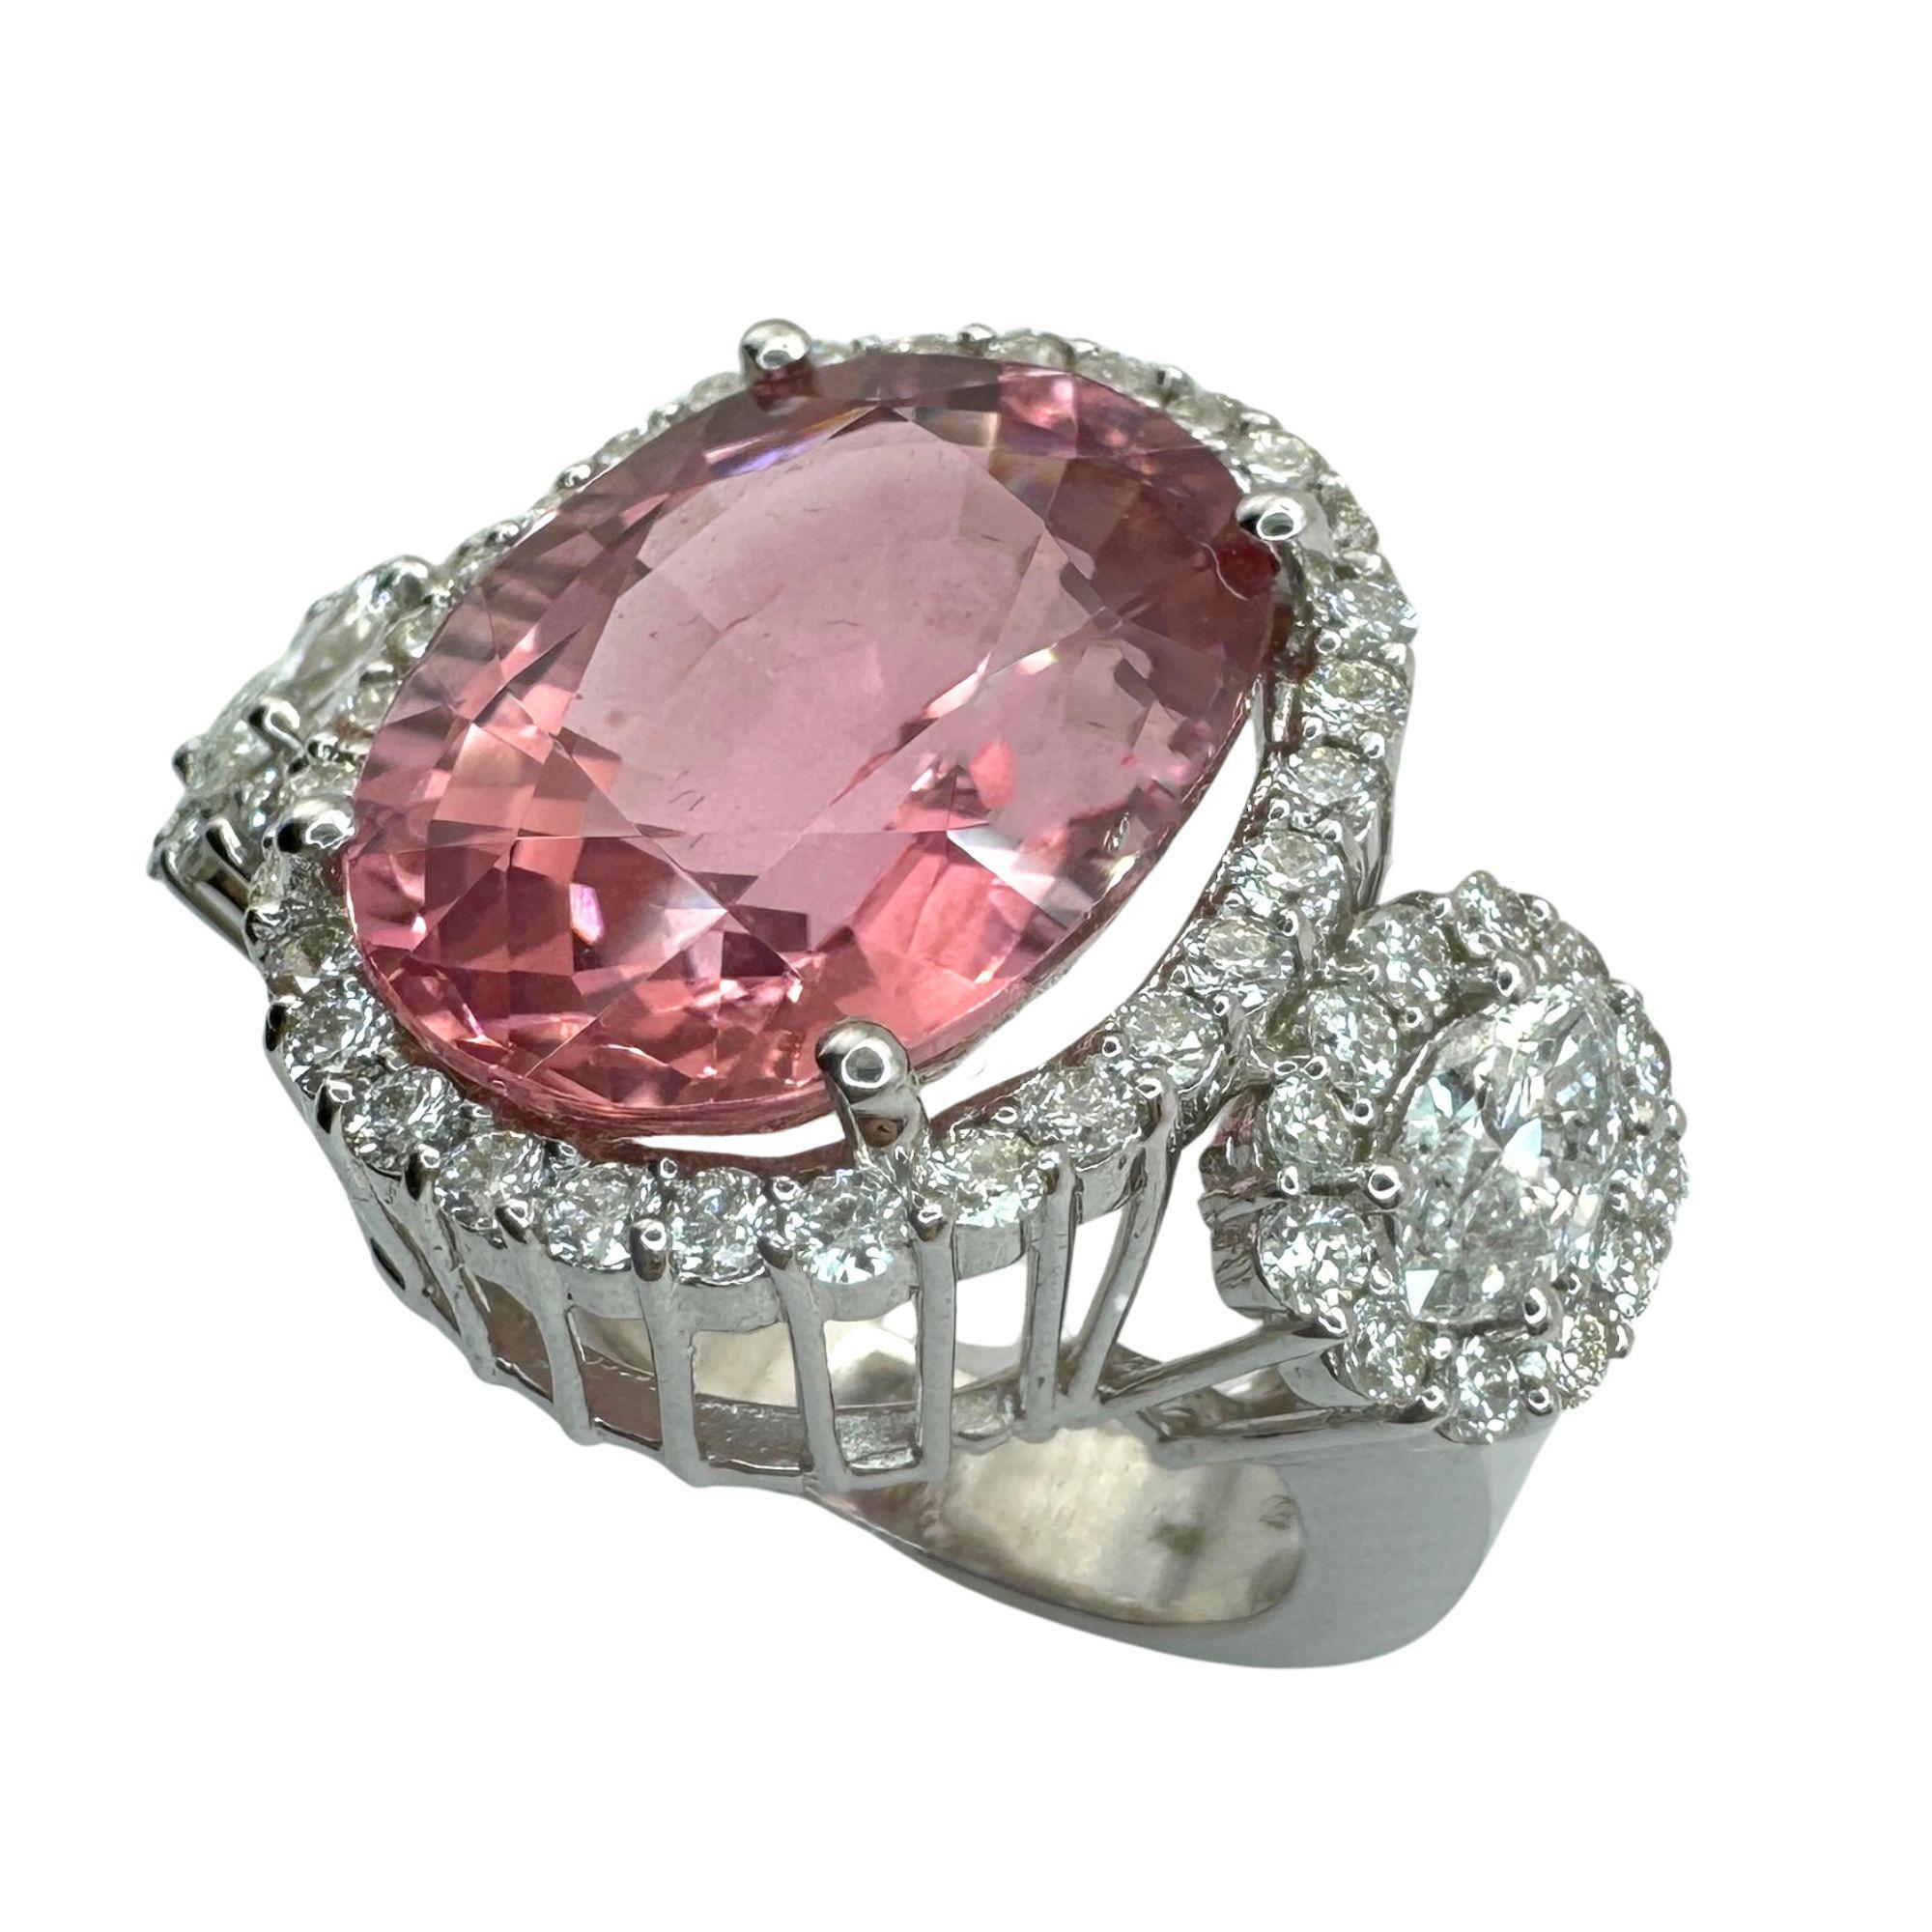 Indulge in luxury with this 18k white gold ring adorned with stunning 1.60 carat diamonds and a striking 10.82 carat pink stone center. The intricate details and 13.20 gram weight make this piece a true statement of elegance and sophistication.